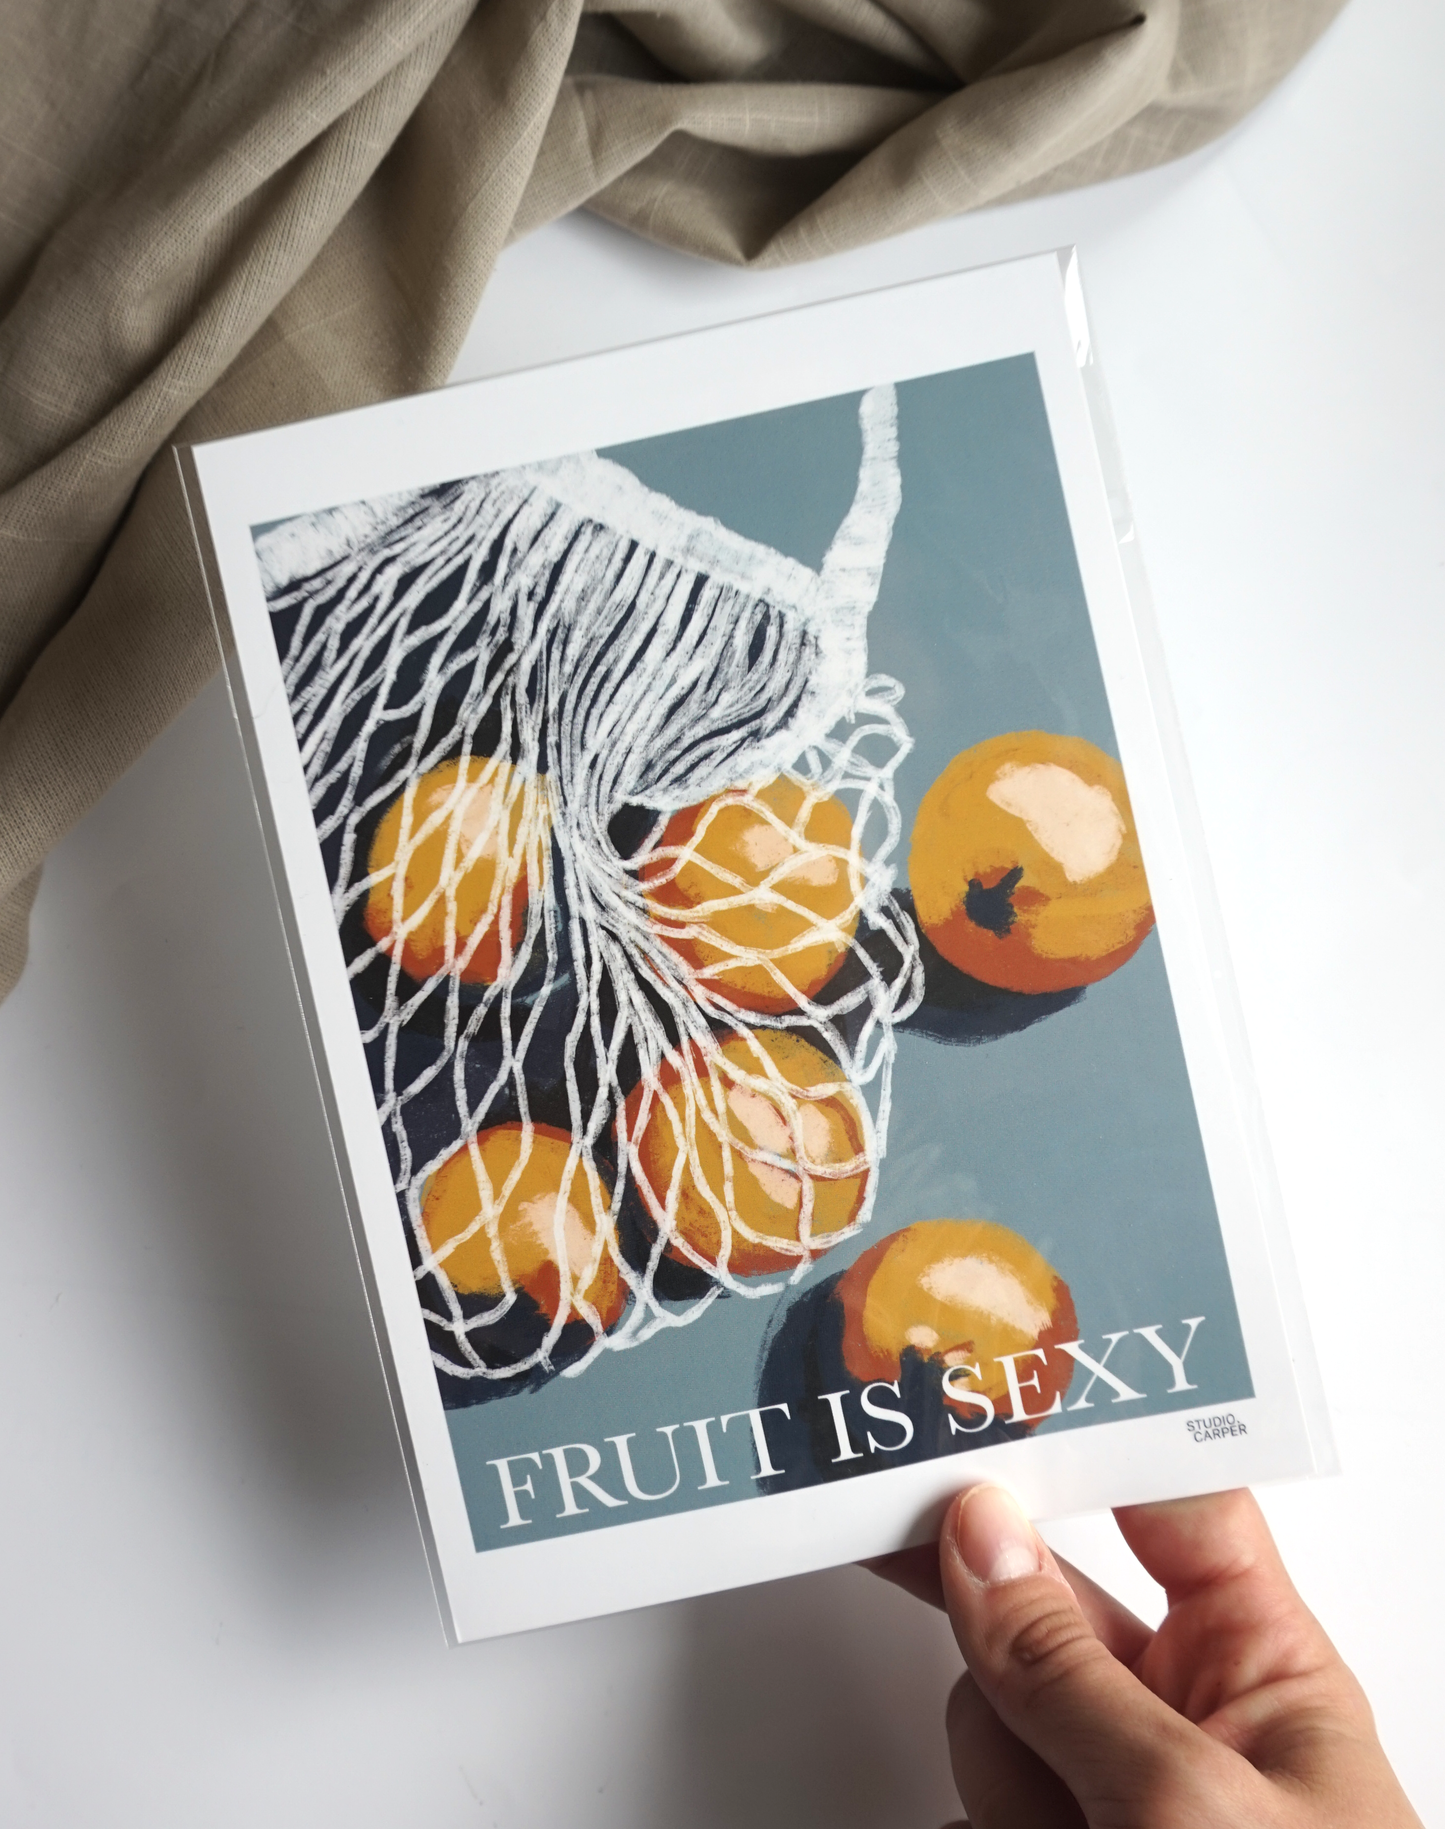 Fruit is sexy